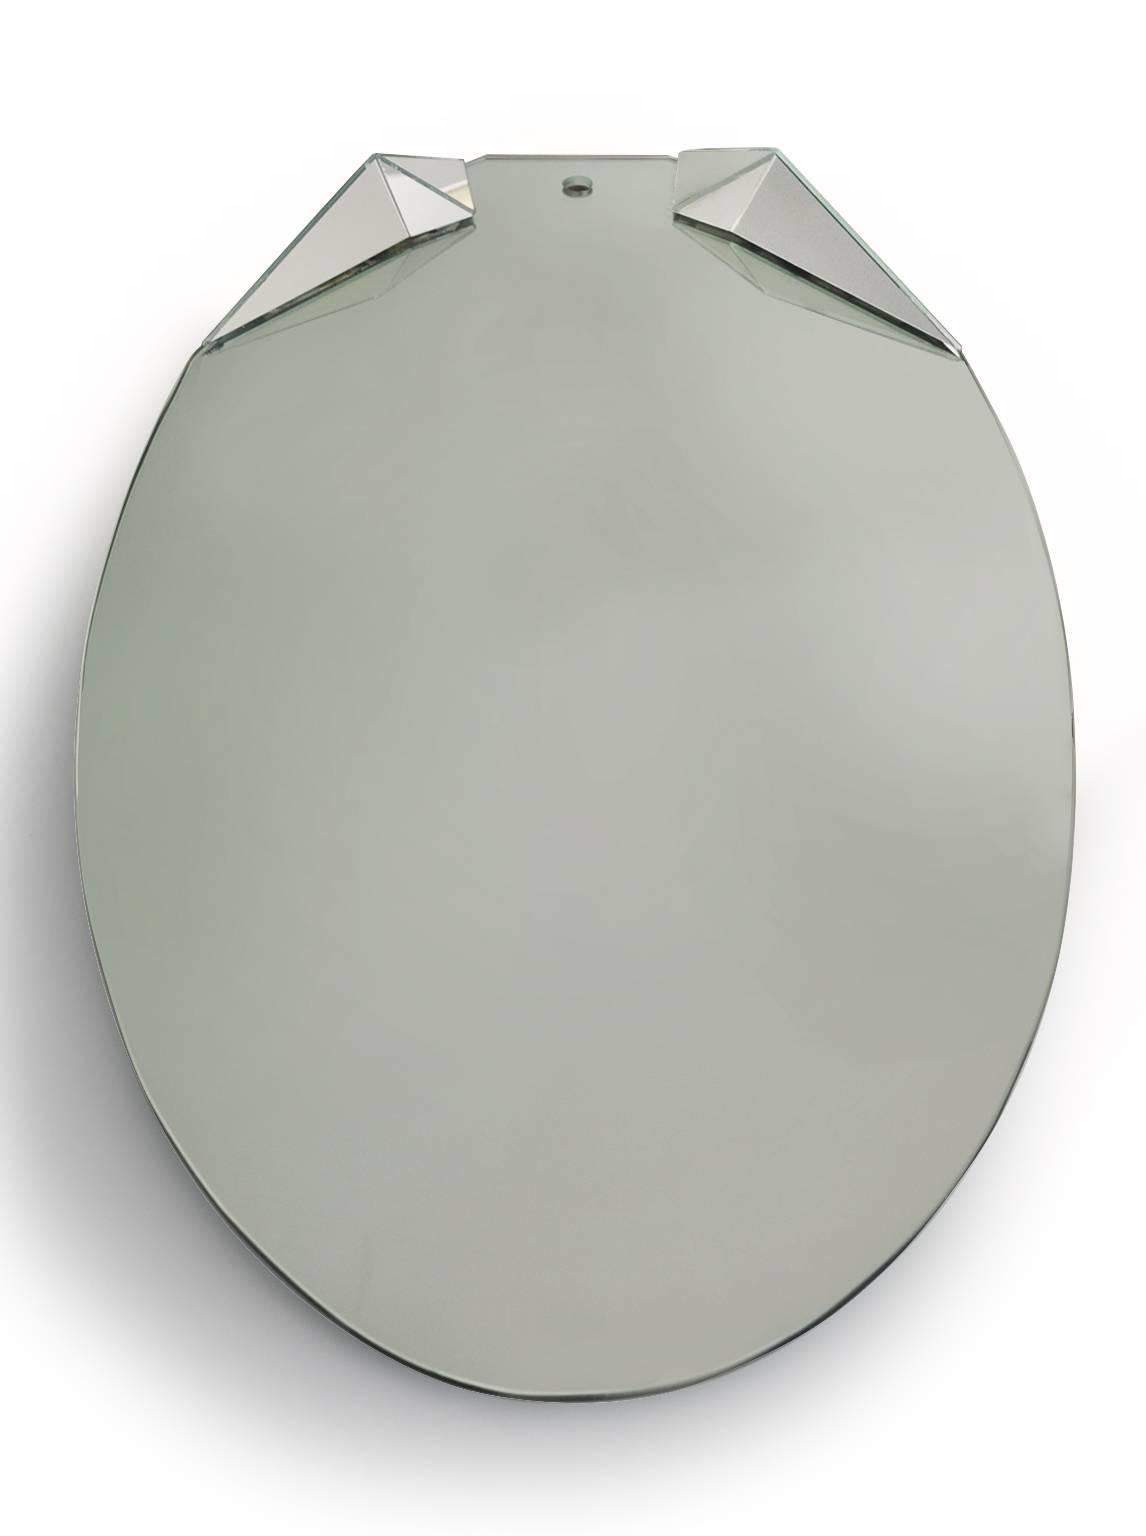 Contemporary Transglass Mirror Designed by Tord Boontje and Made by Artisans in Guatemala For Sale